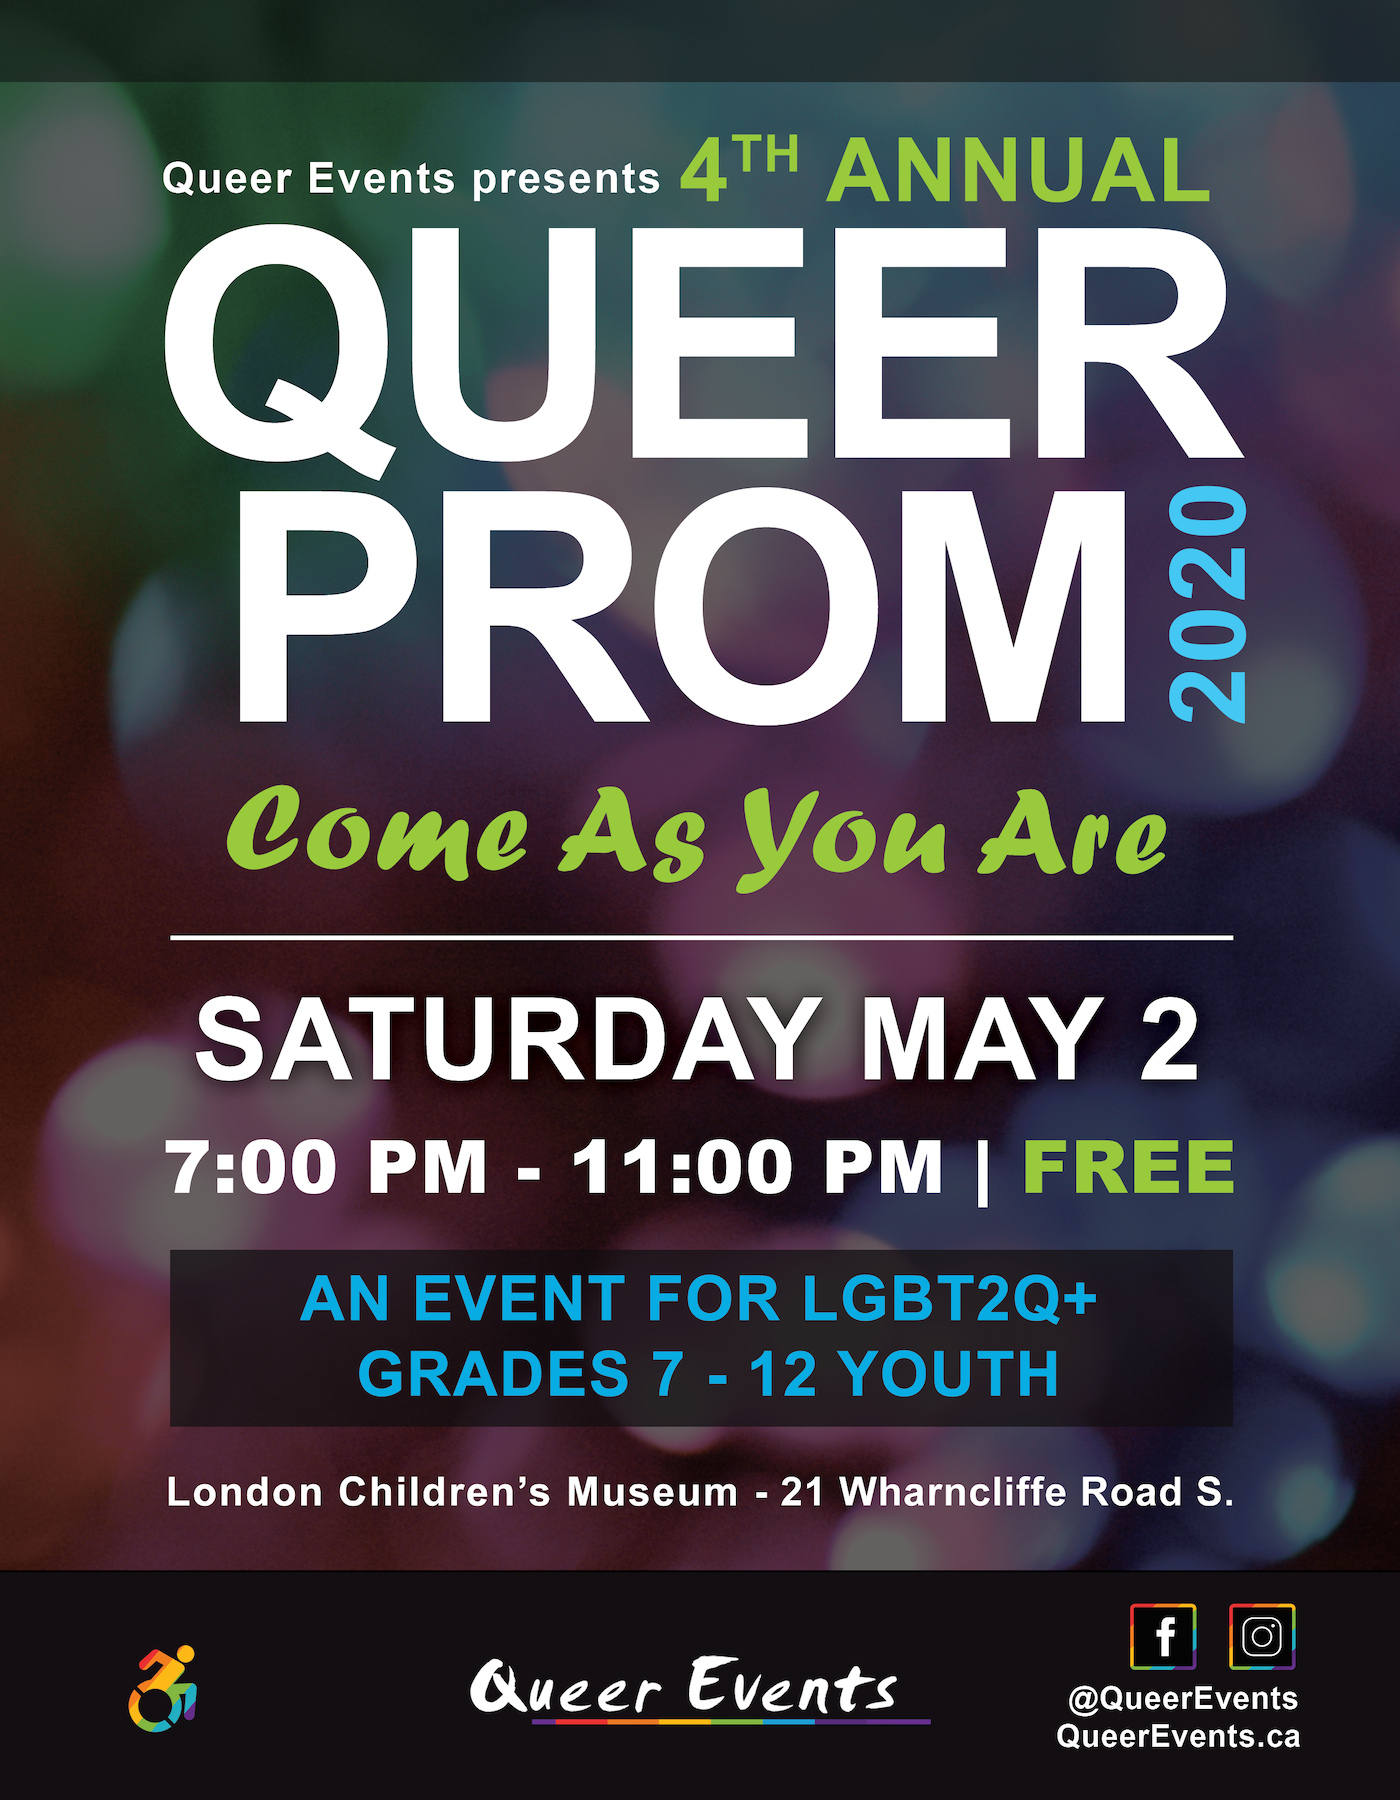 QueerEvents.ca - London event listing - Queer Prom for Youth 2020